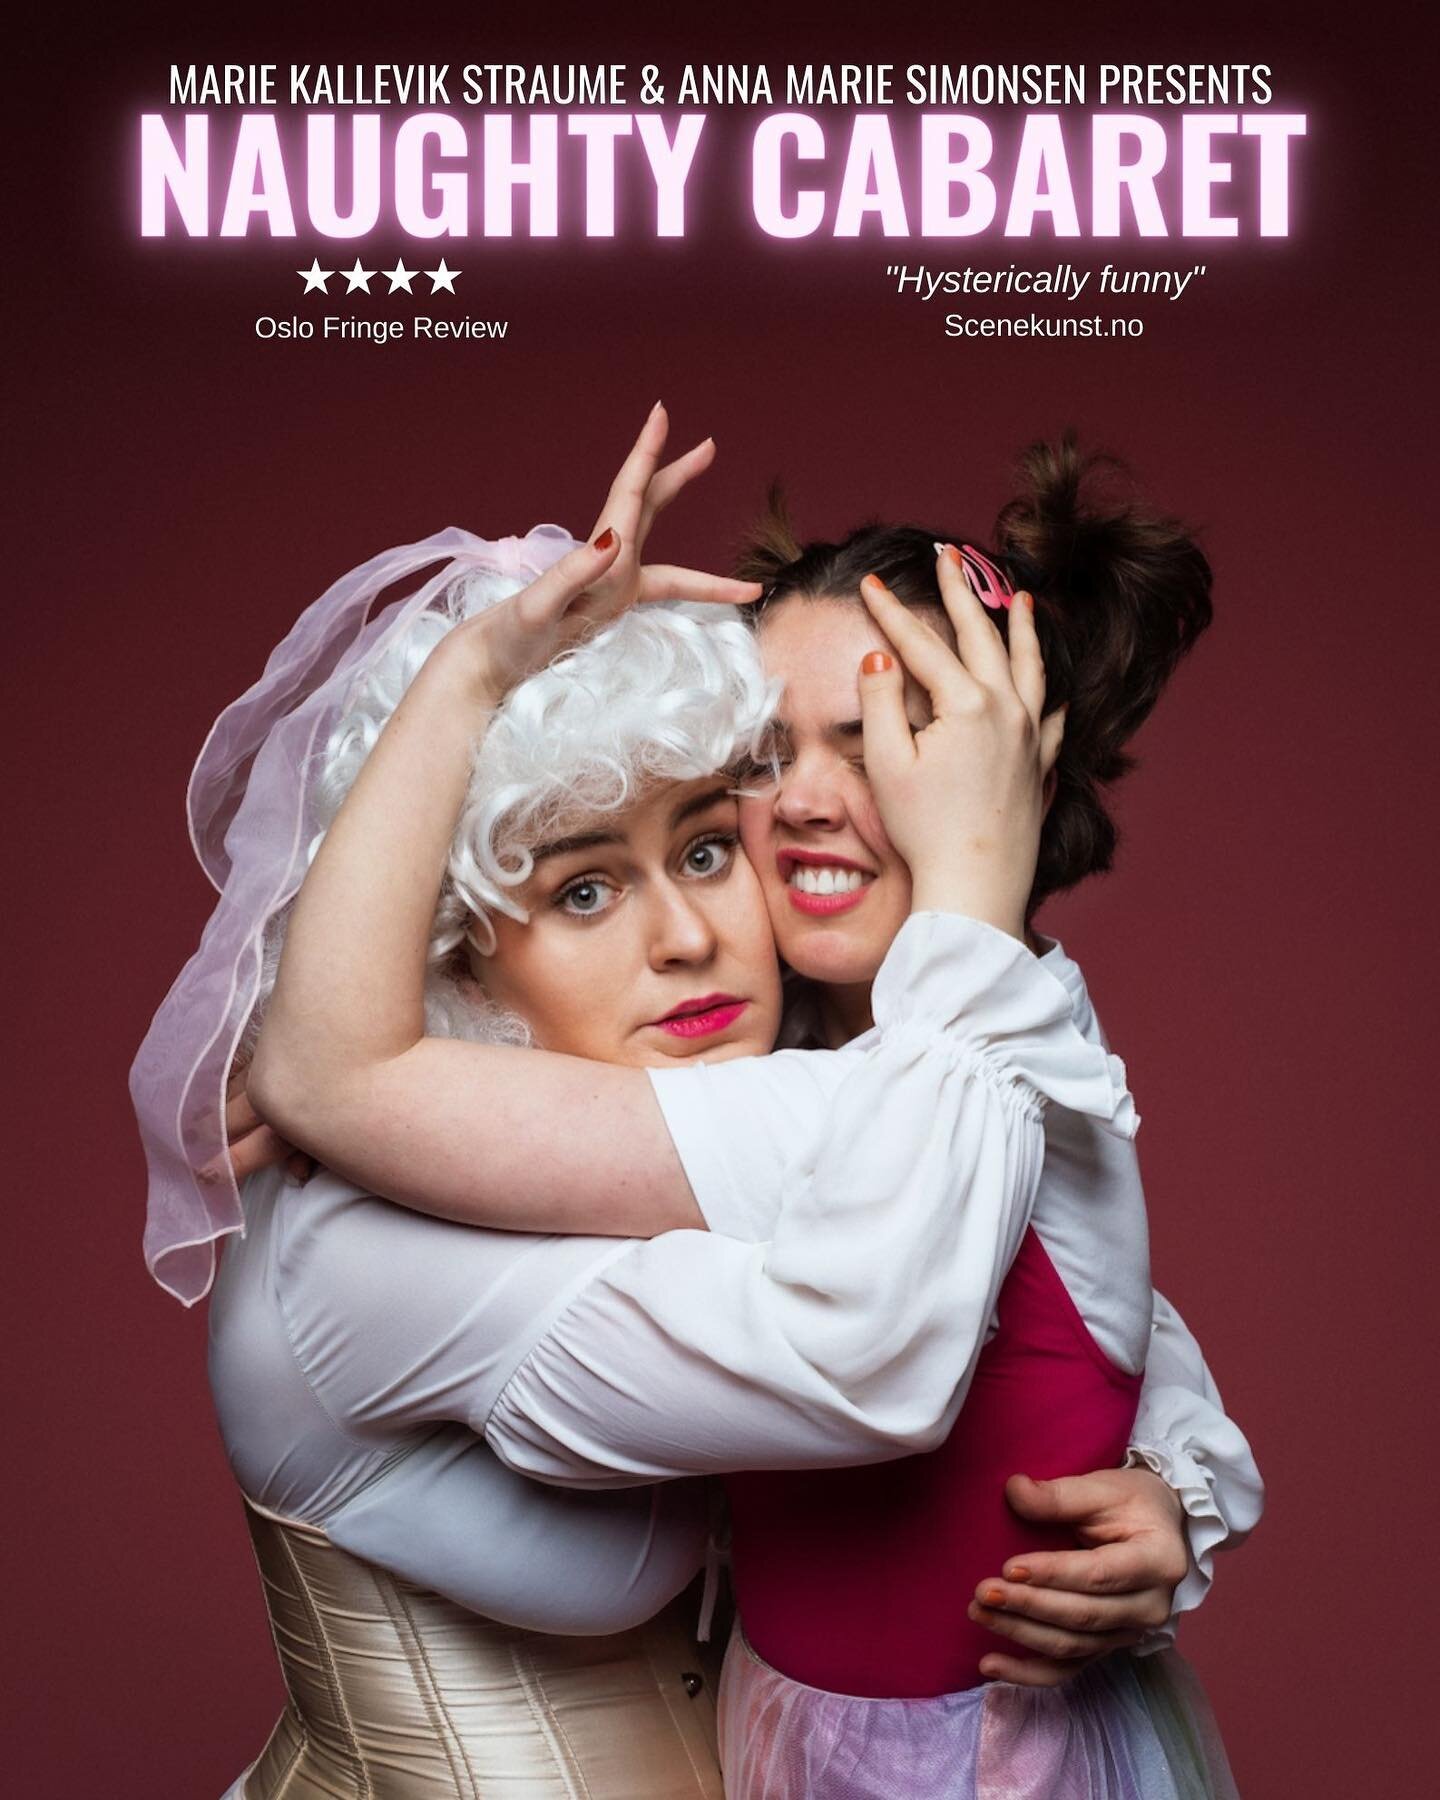 Oslo! Naughty Cabaret is back for ONE NIGHT ONLY at @saltartmusic on February 24th 8PM 💫

Lineup tba

Tickets are selling fast - link in bio 

📸 @bekor_